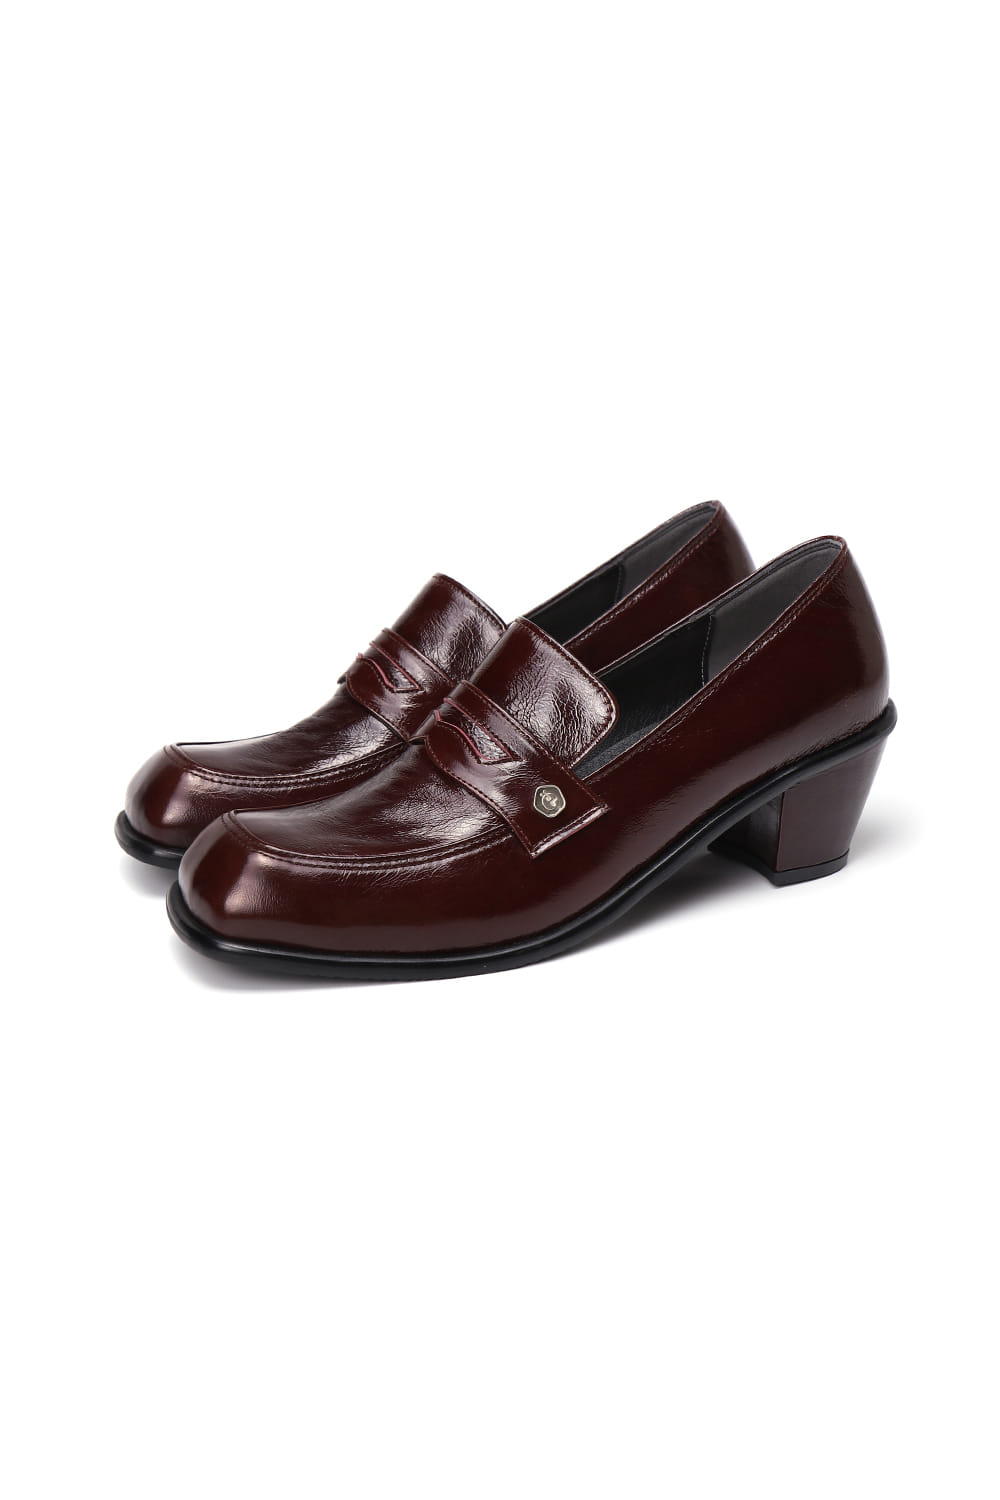 MOND PENNY LOAFER [CHERRY BROWN]